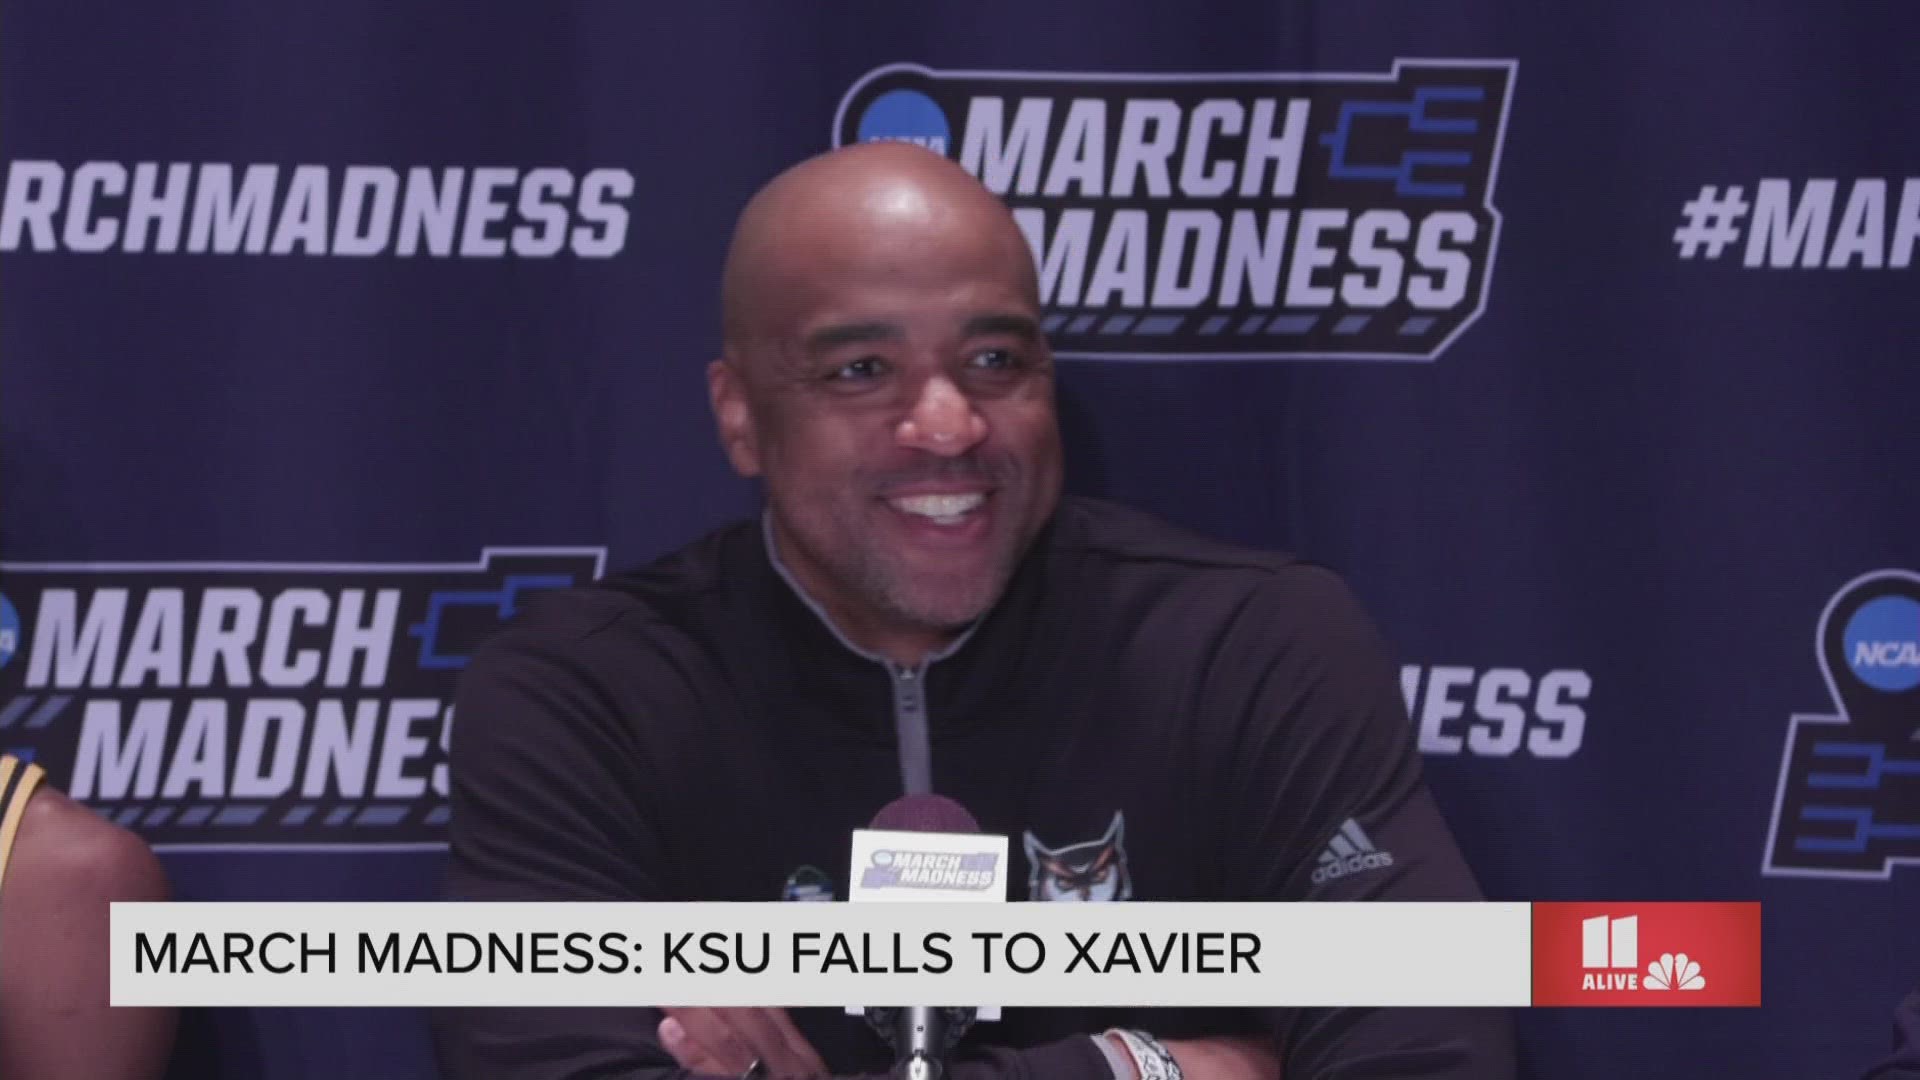 Though KSU fell in the first round of the NCAA tournament to opponents Xavier, Coach Amir Abdur-Rahim said he was proud of his team.